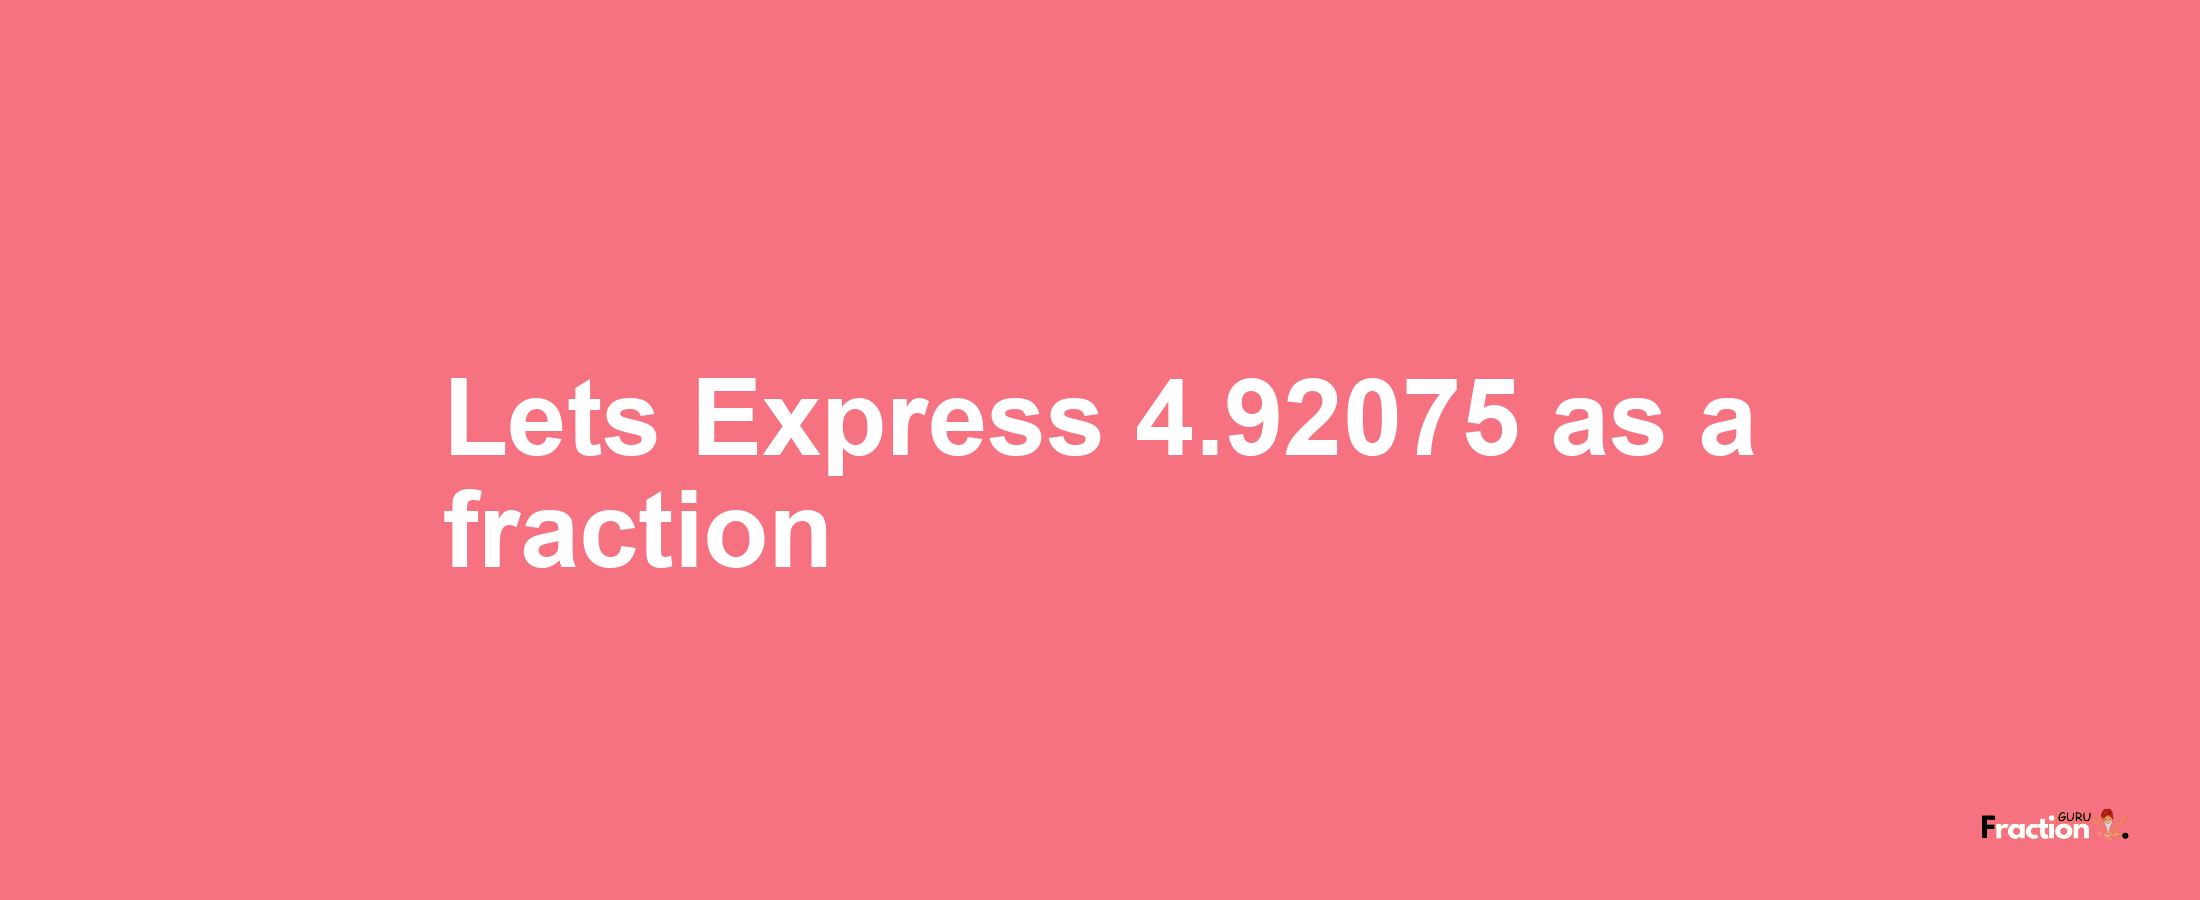 Lets Express 4.92075 as afraction